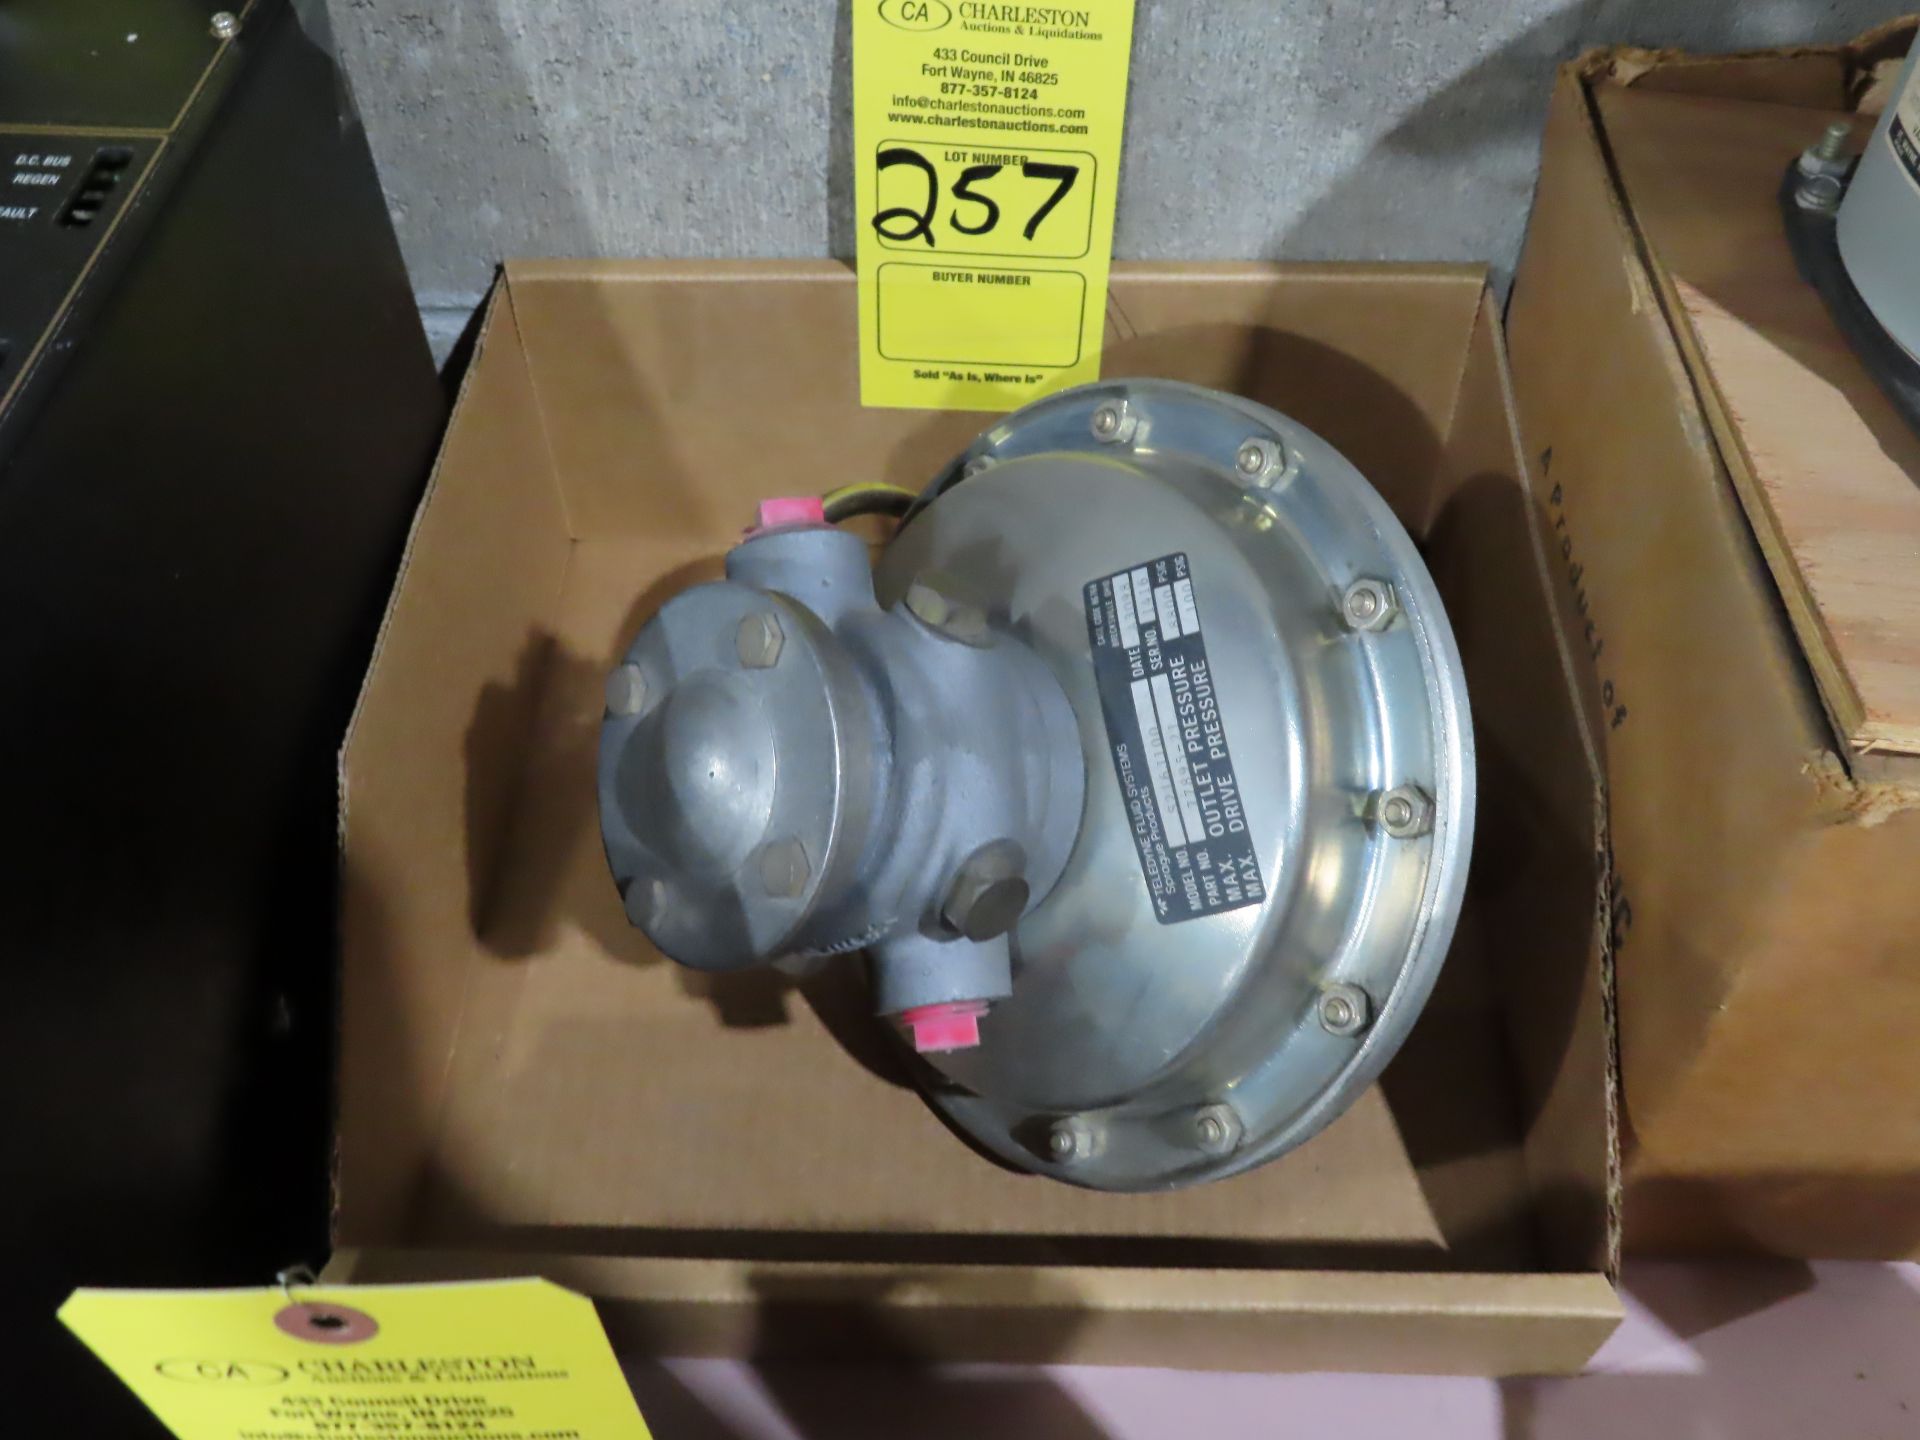 Teledyne fluid systems model S216T100, new old stock, as always with Brolyn LLC auctions, all lots